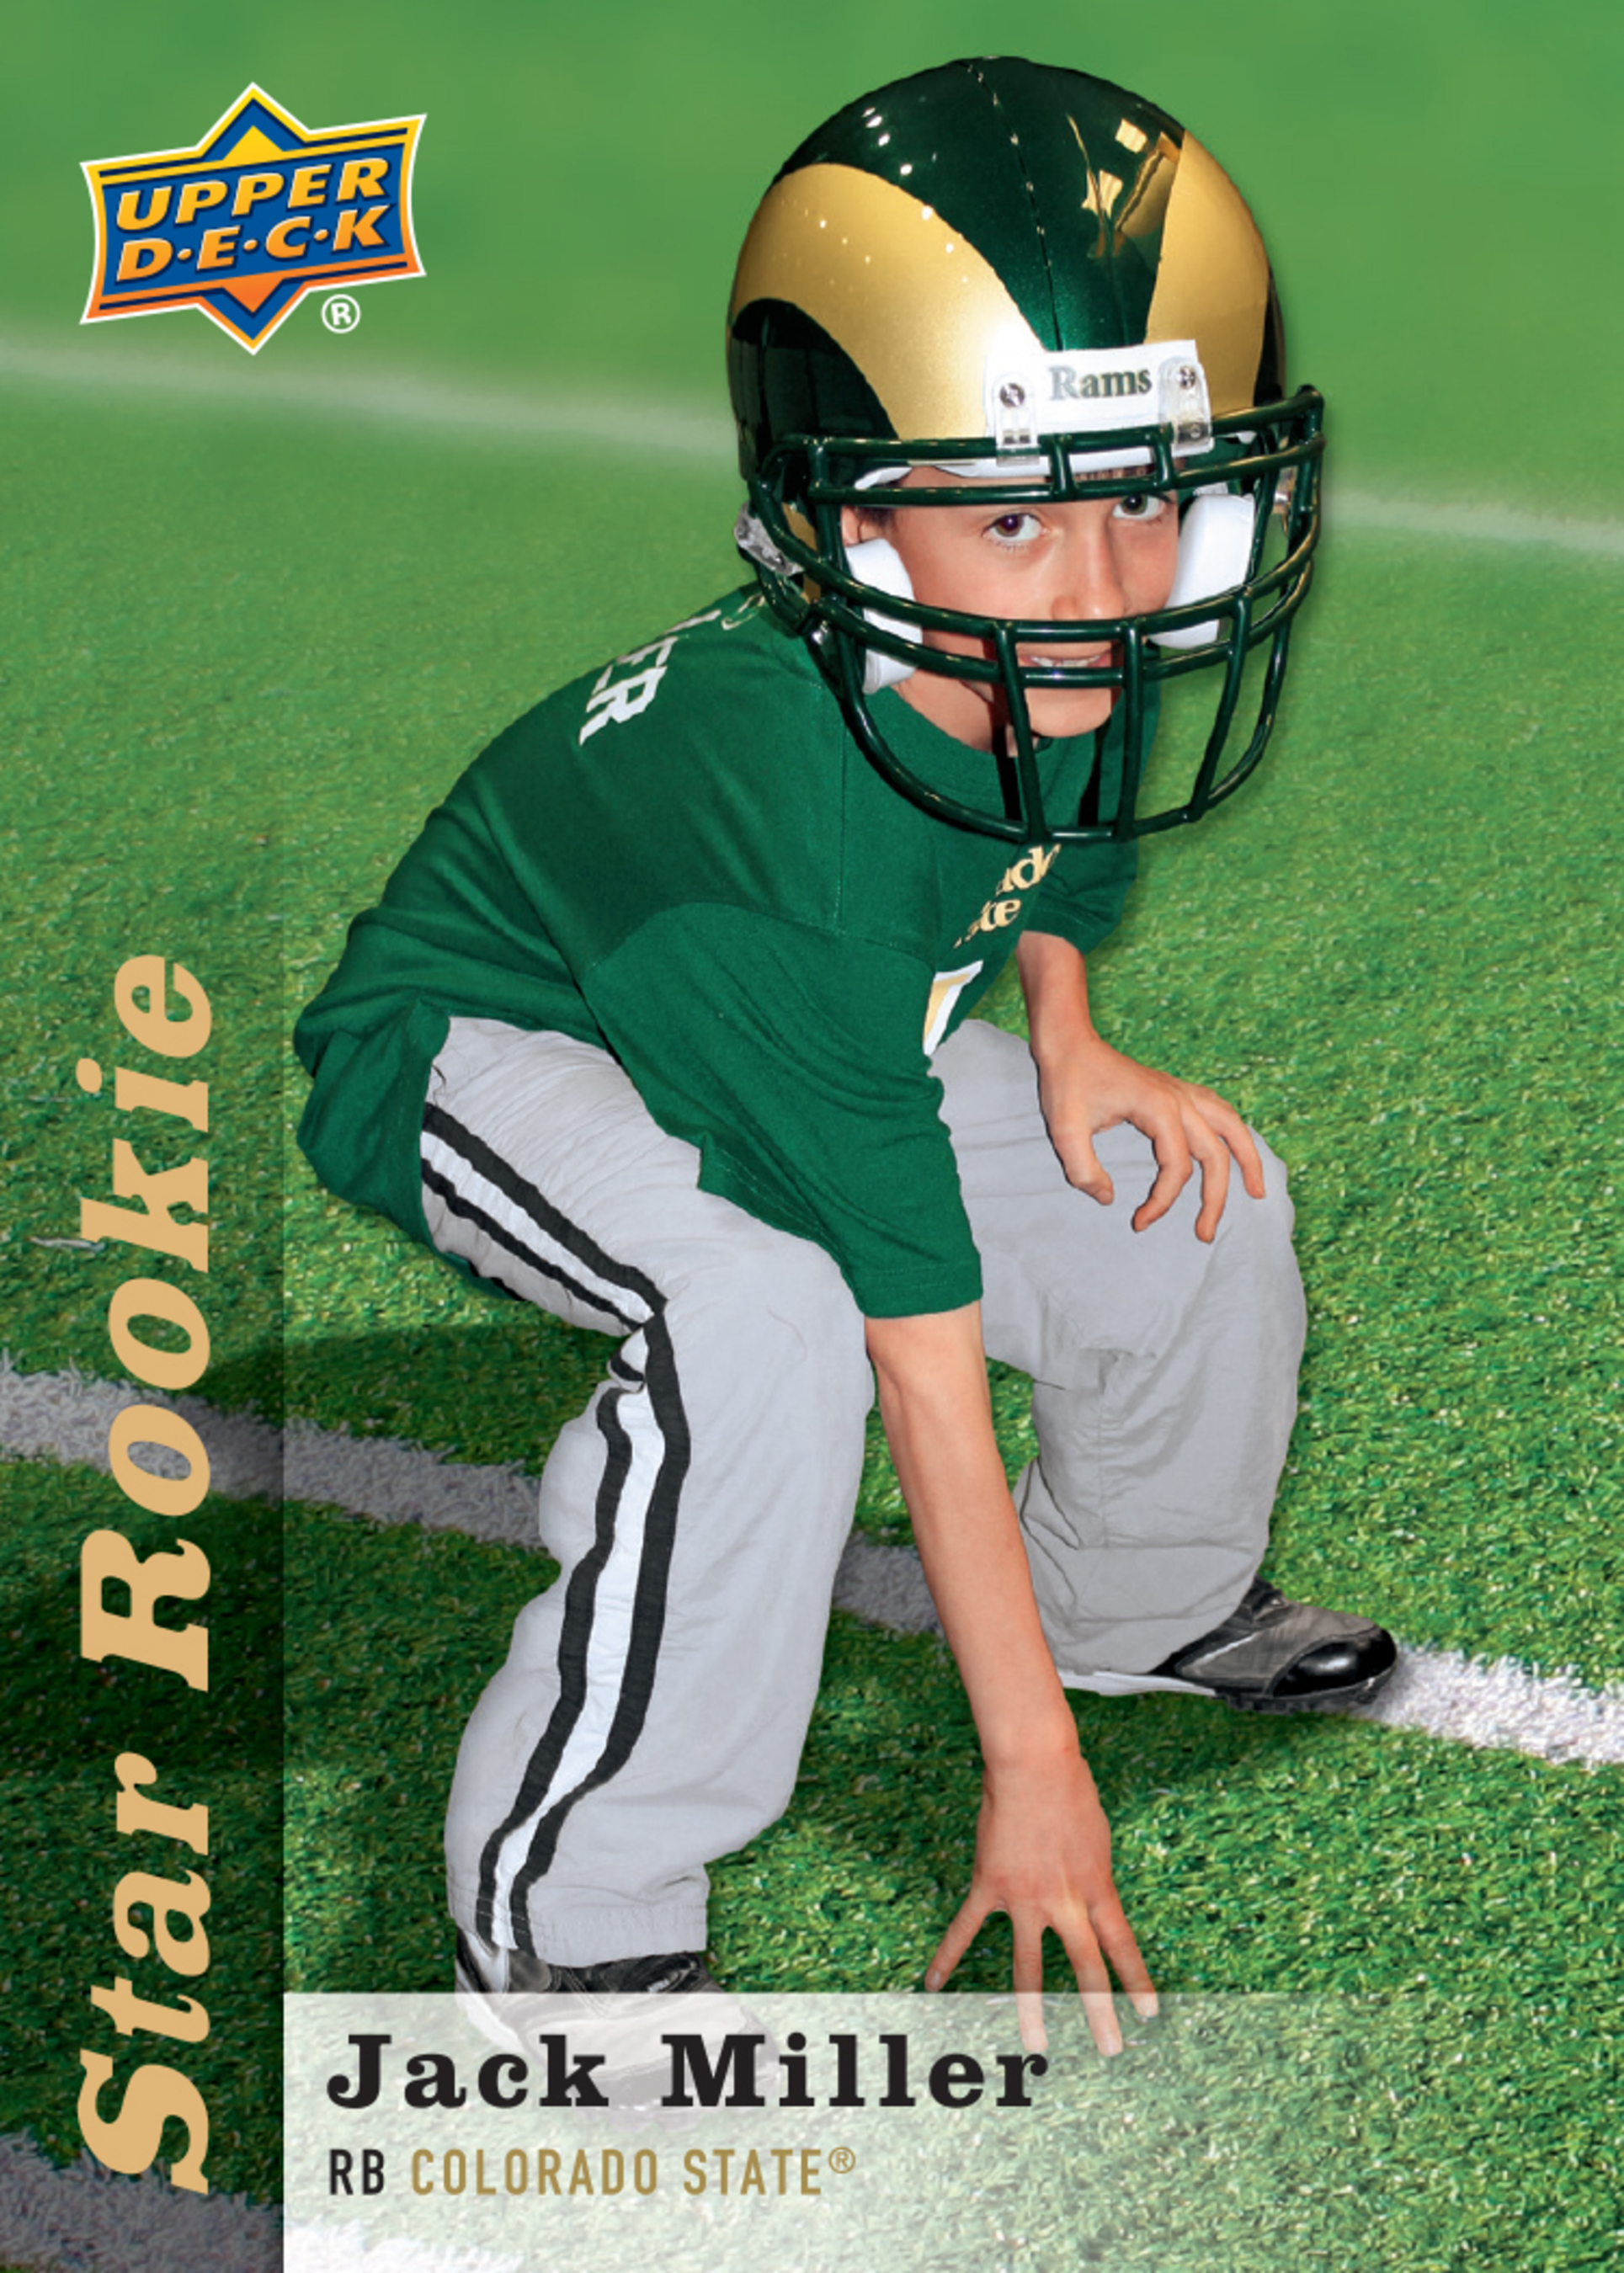 9-year-old cancer patient receives his very own Upper Deck Star Rookie card. Card depicted Jack Miller with the Colorado State Rams who adopted Jack through the Friends of Jaclyn charity. Jack's Upper Deck Star Rookie cards will be used for charitable purposes and to create awareness for the Friends of Jaclyn charity. (PRNewsFoto/Upper Deck)